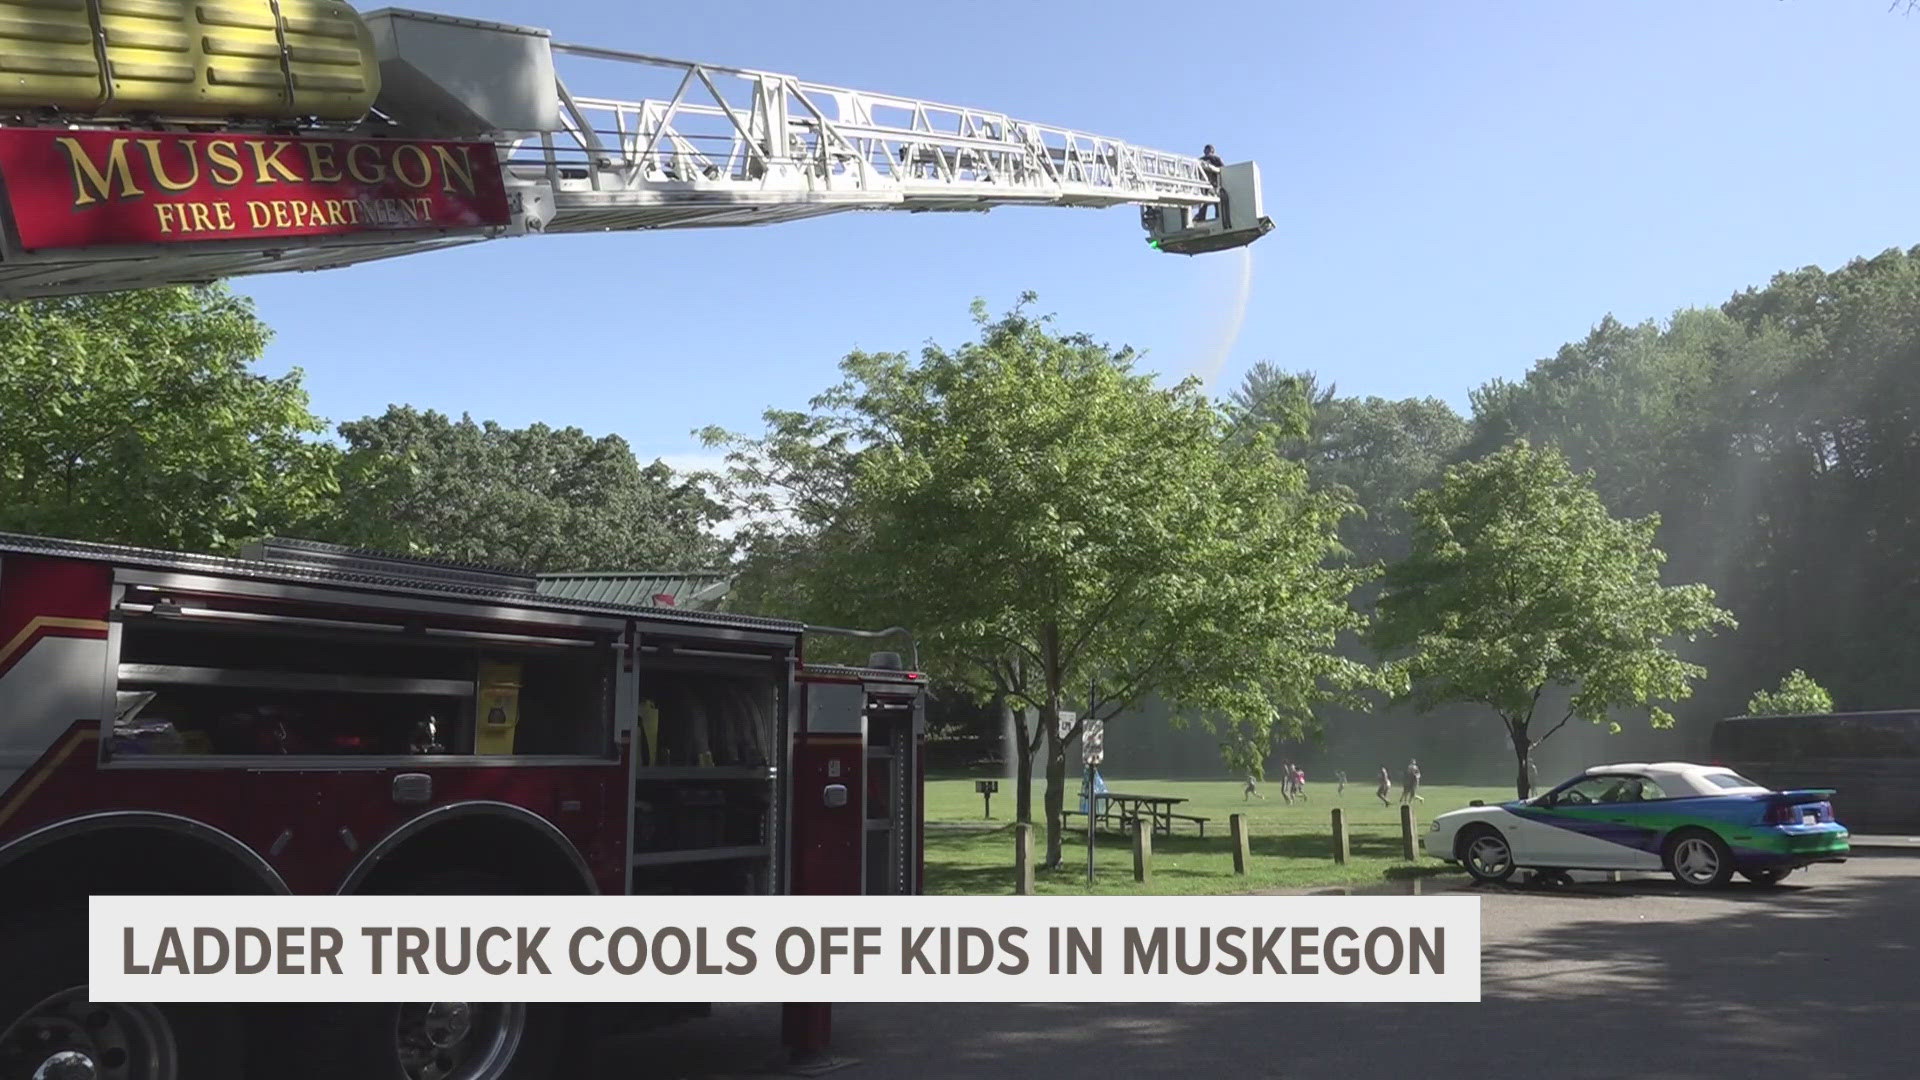 The Muskegon Fire Department was at Beachwood Park on Tuesday, and they've got more stops planned for the rest of the week.